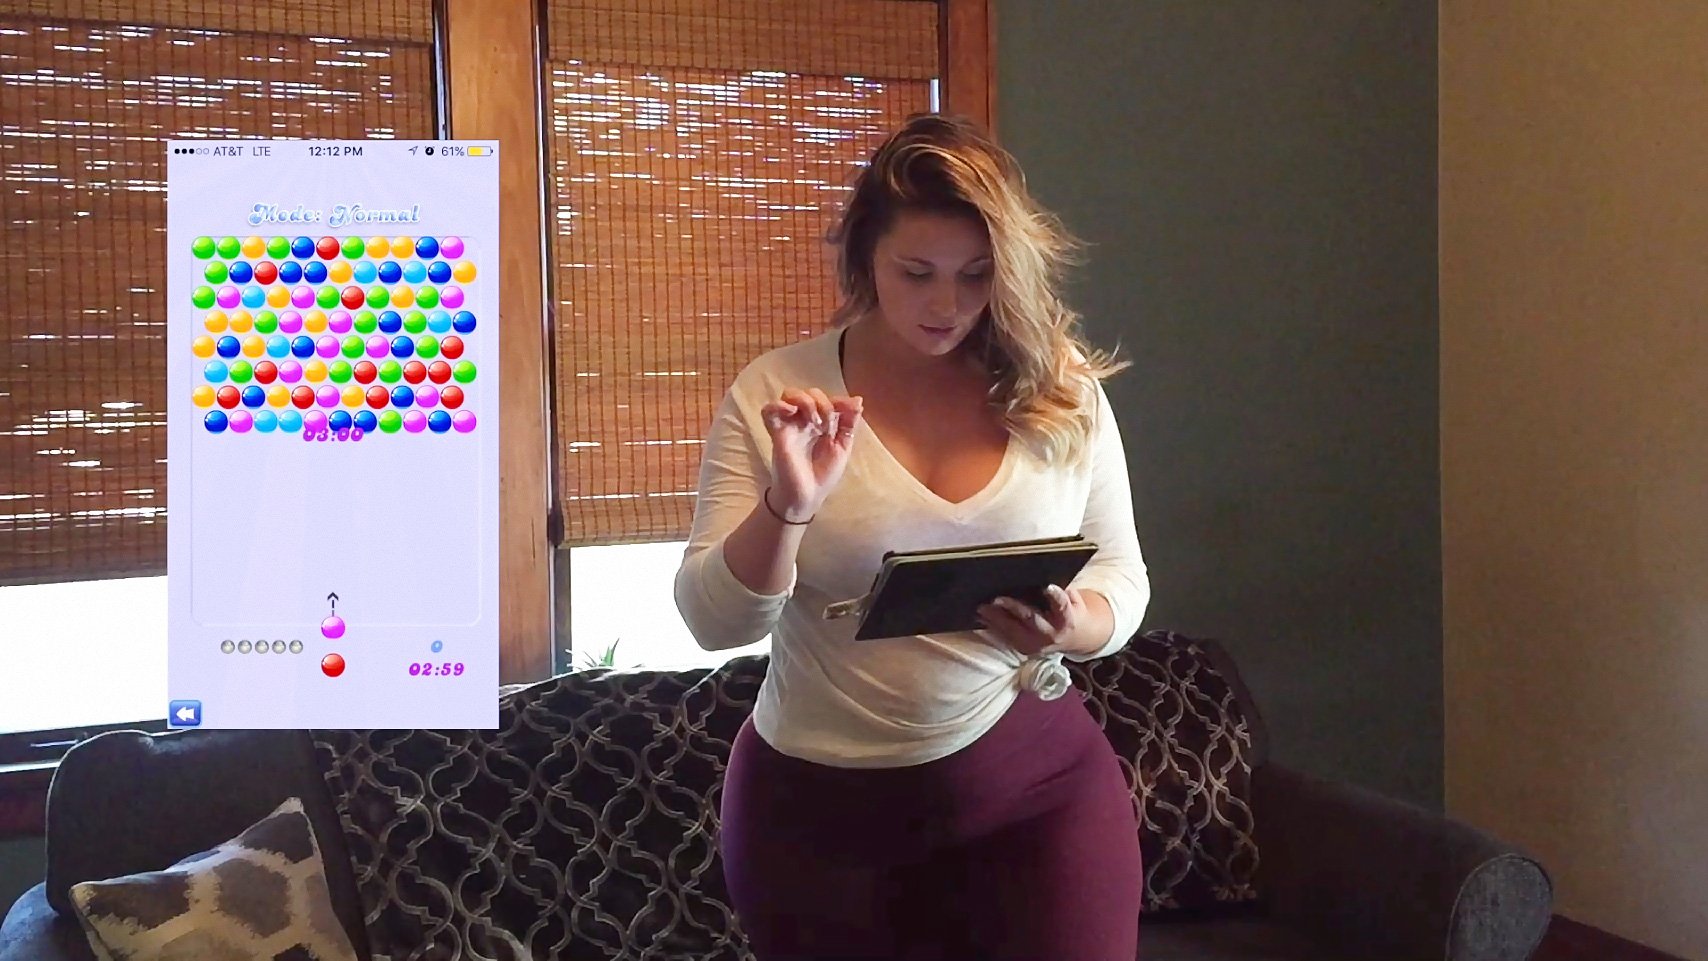 Allgoodthingstv On Twitter Chk Out Olivia Jensen Playing Bubble